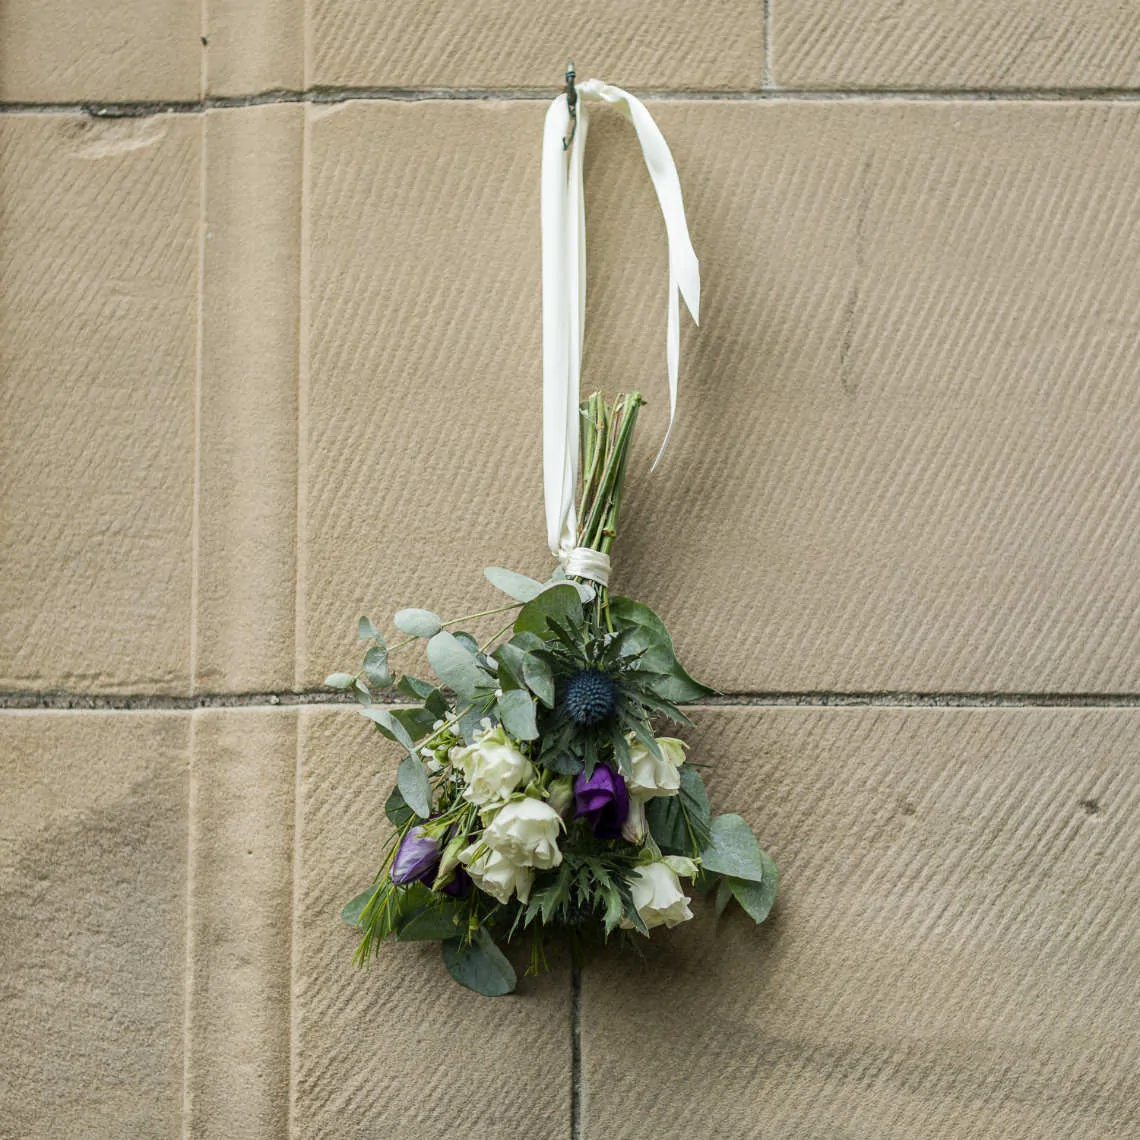 Floral decoration hanging at the church entrance